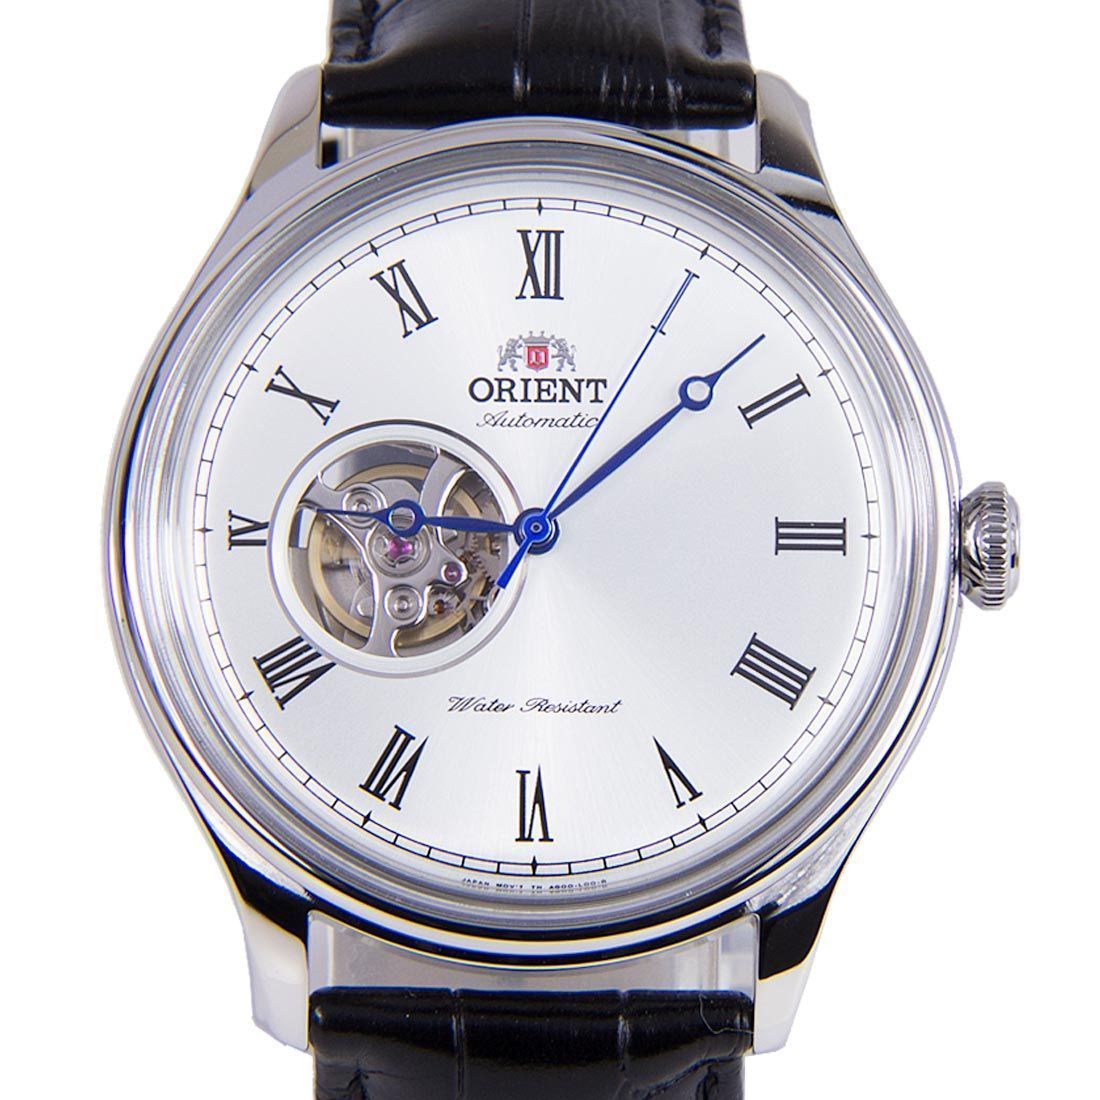 Orient Mechanical White Open Heart FAG00003W0 AG00003W Leather Band Watch -Orient